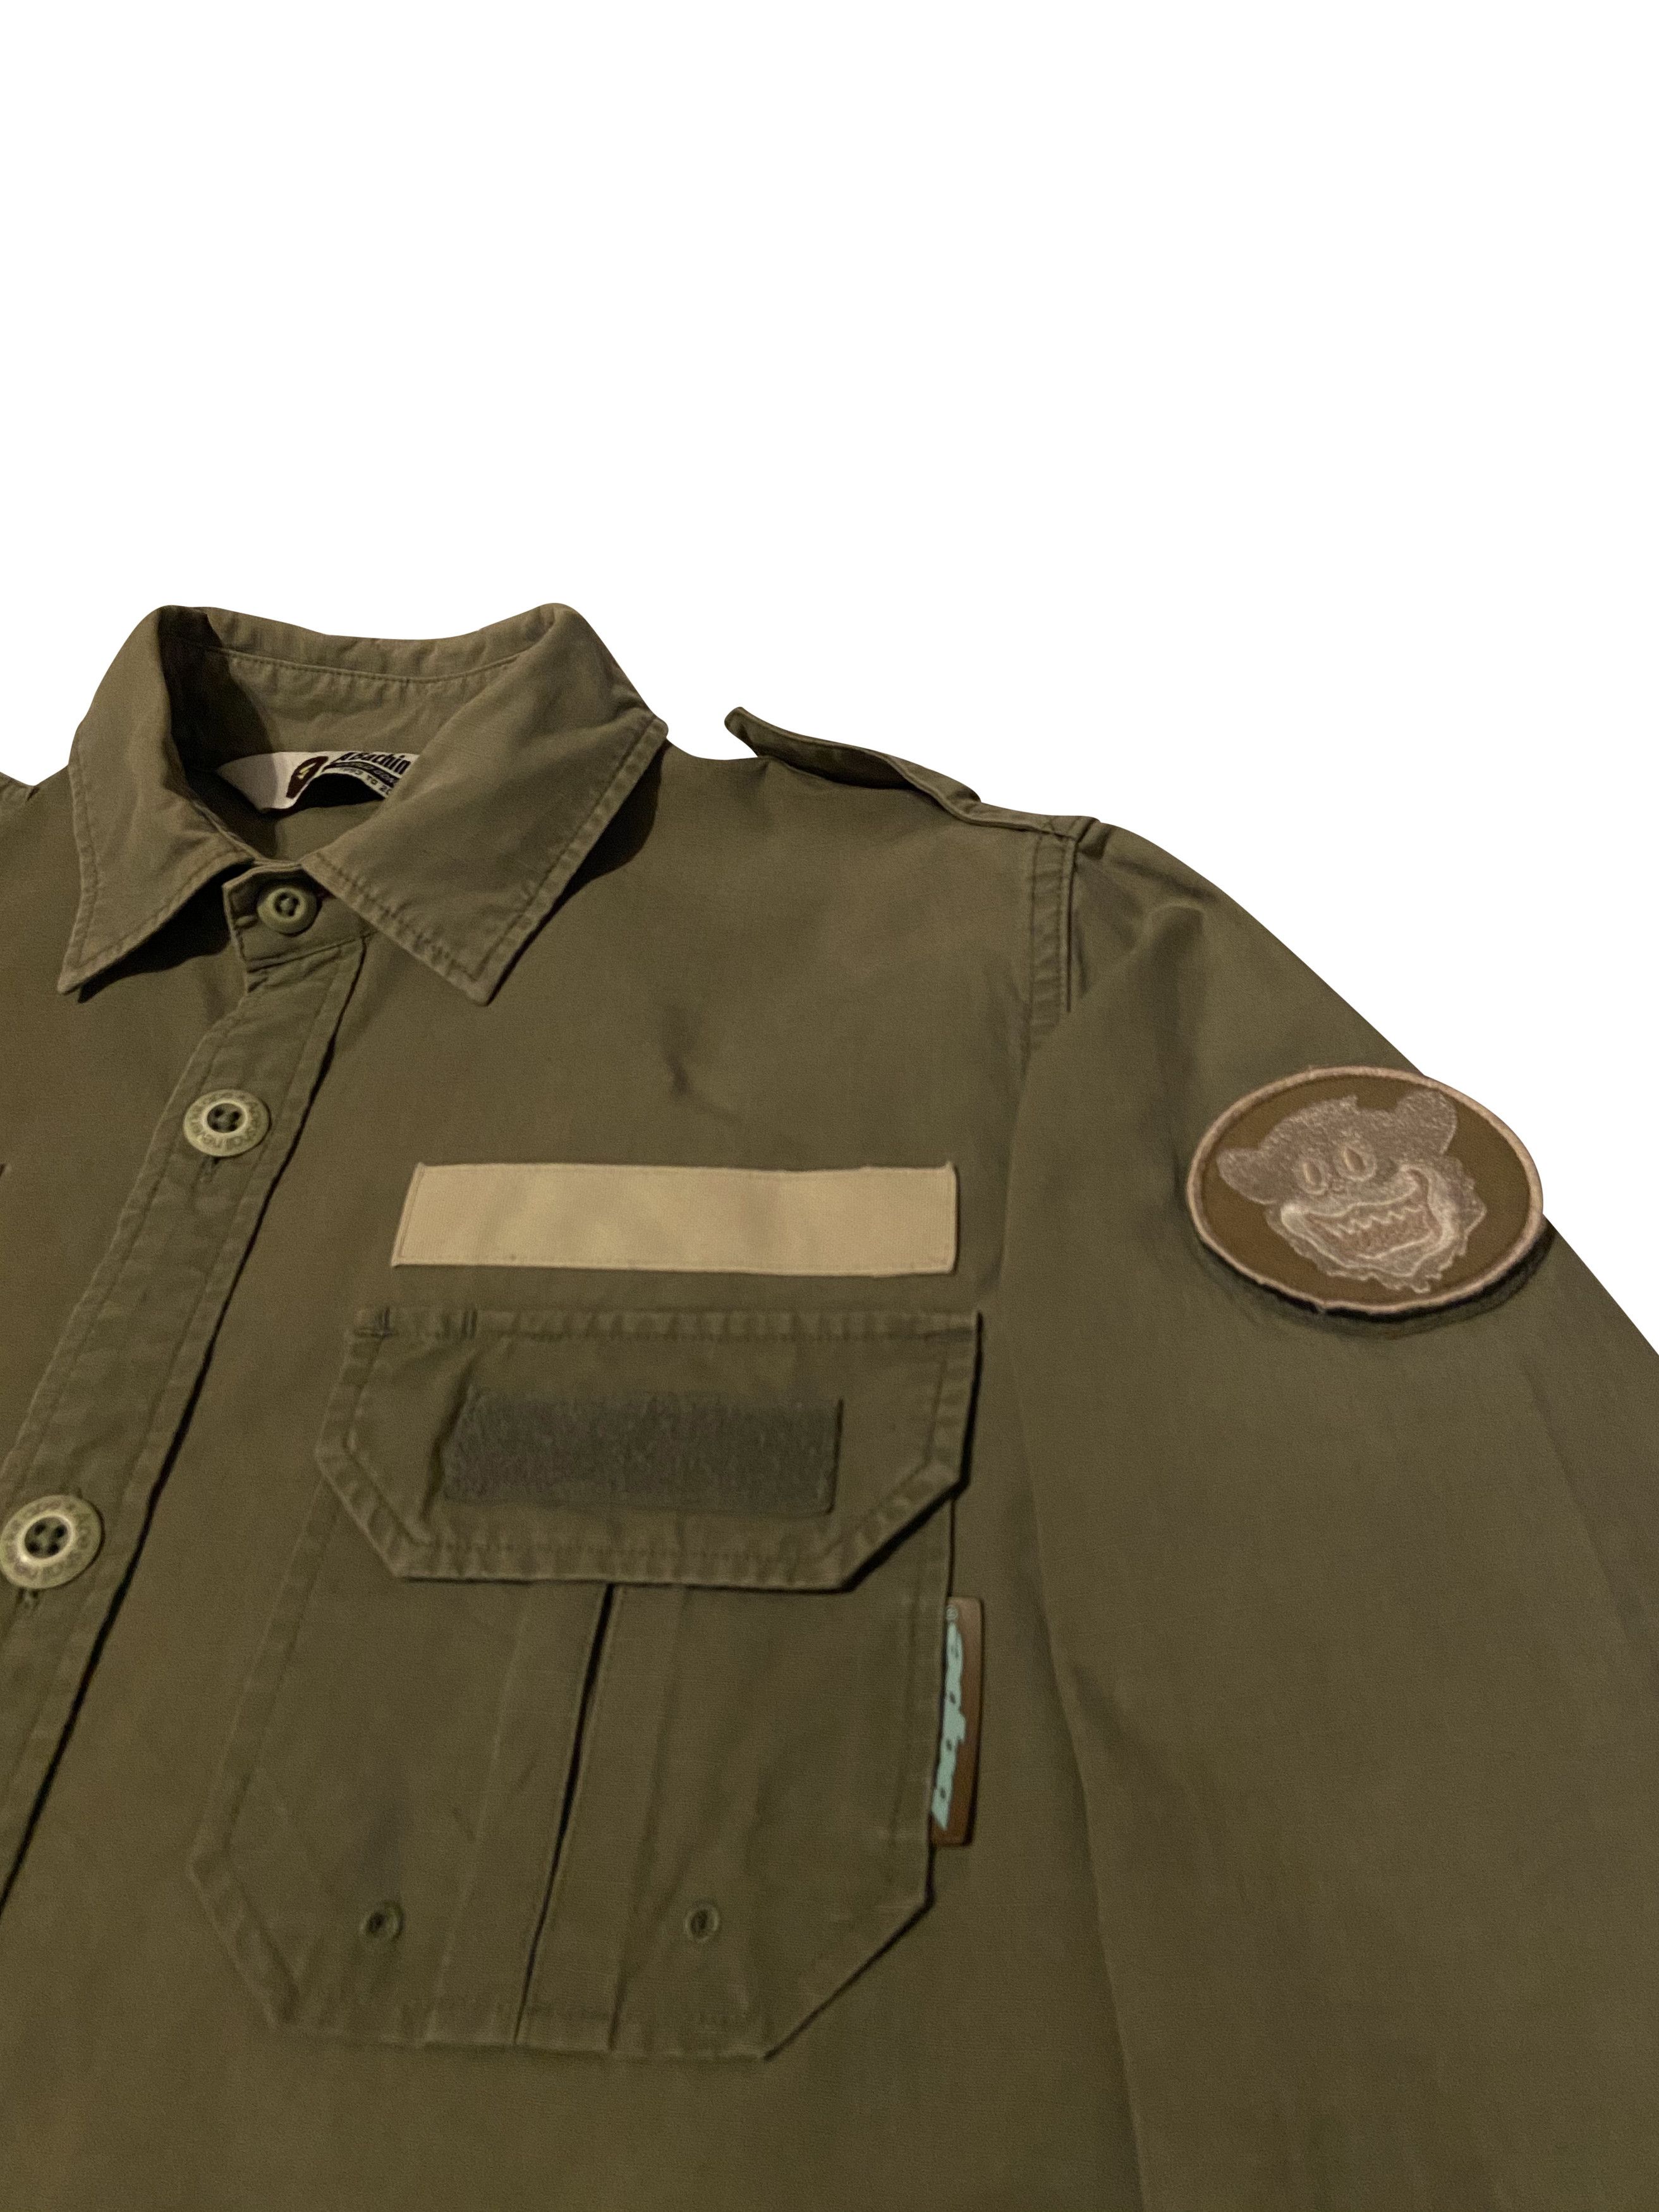 Bape Octopus Military Shirt w/ Velcro Patch - Aoyoma Exclusive | Grailed